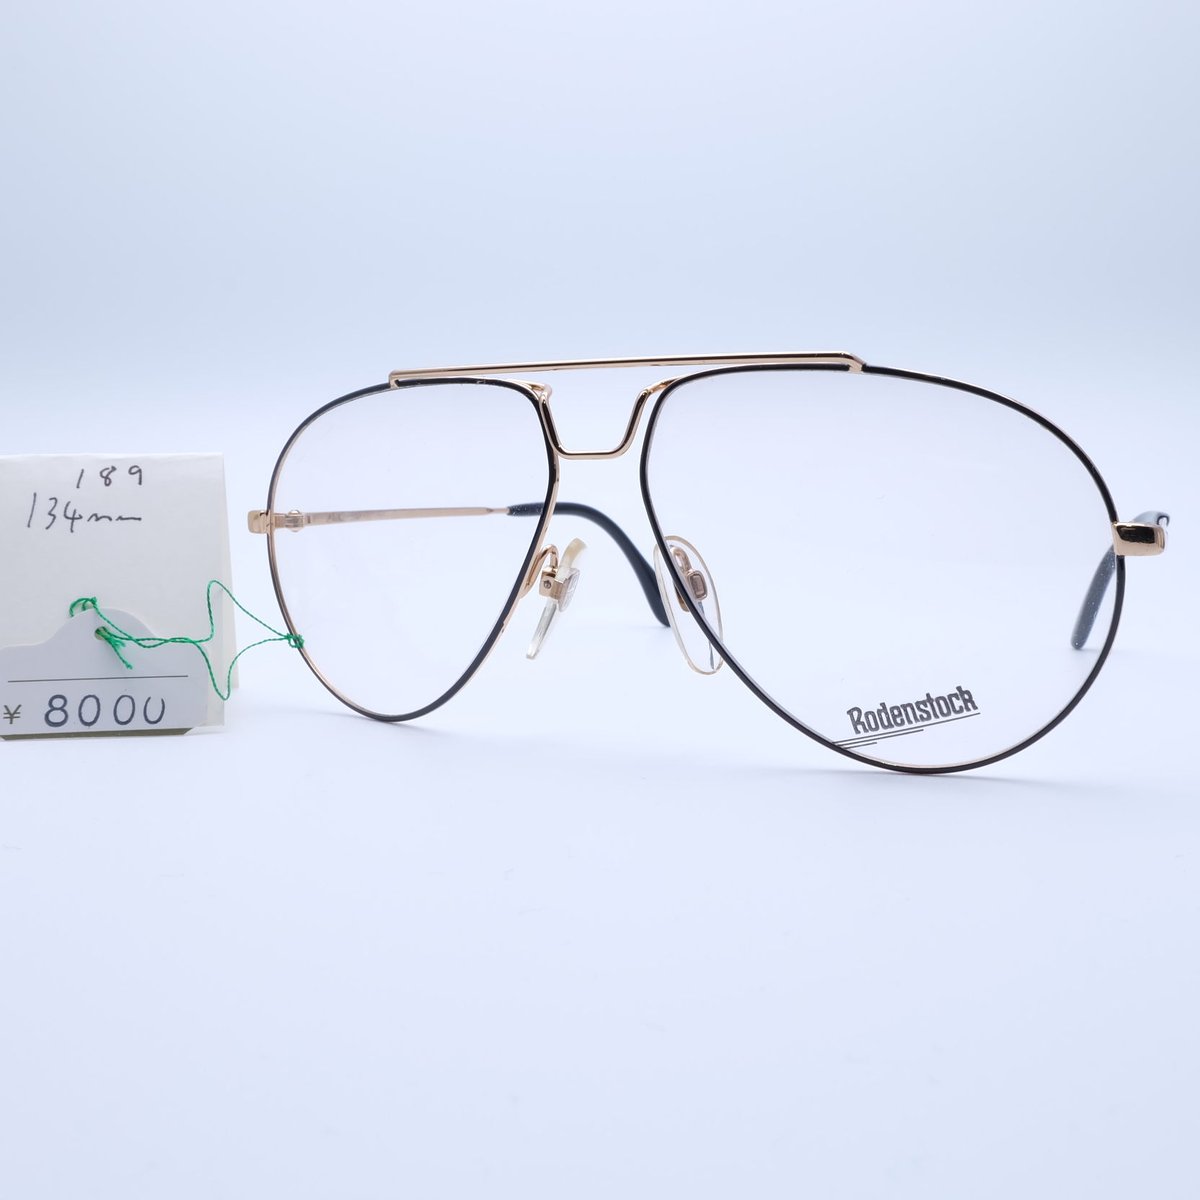 RODENSTOCK Young Look メタルフレーム No.189 | Mellow S...